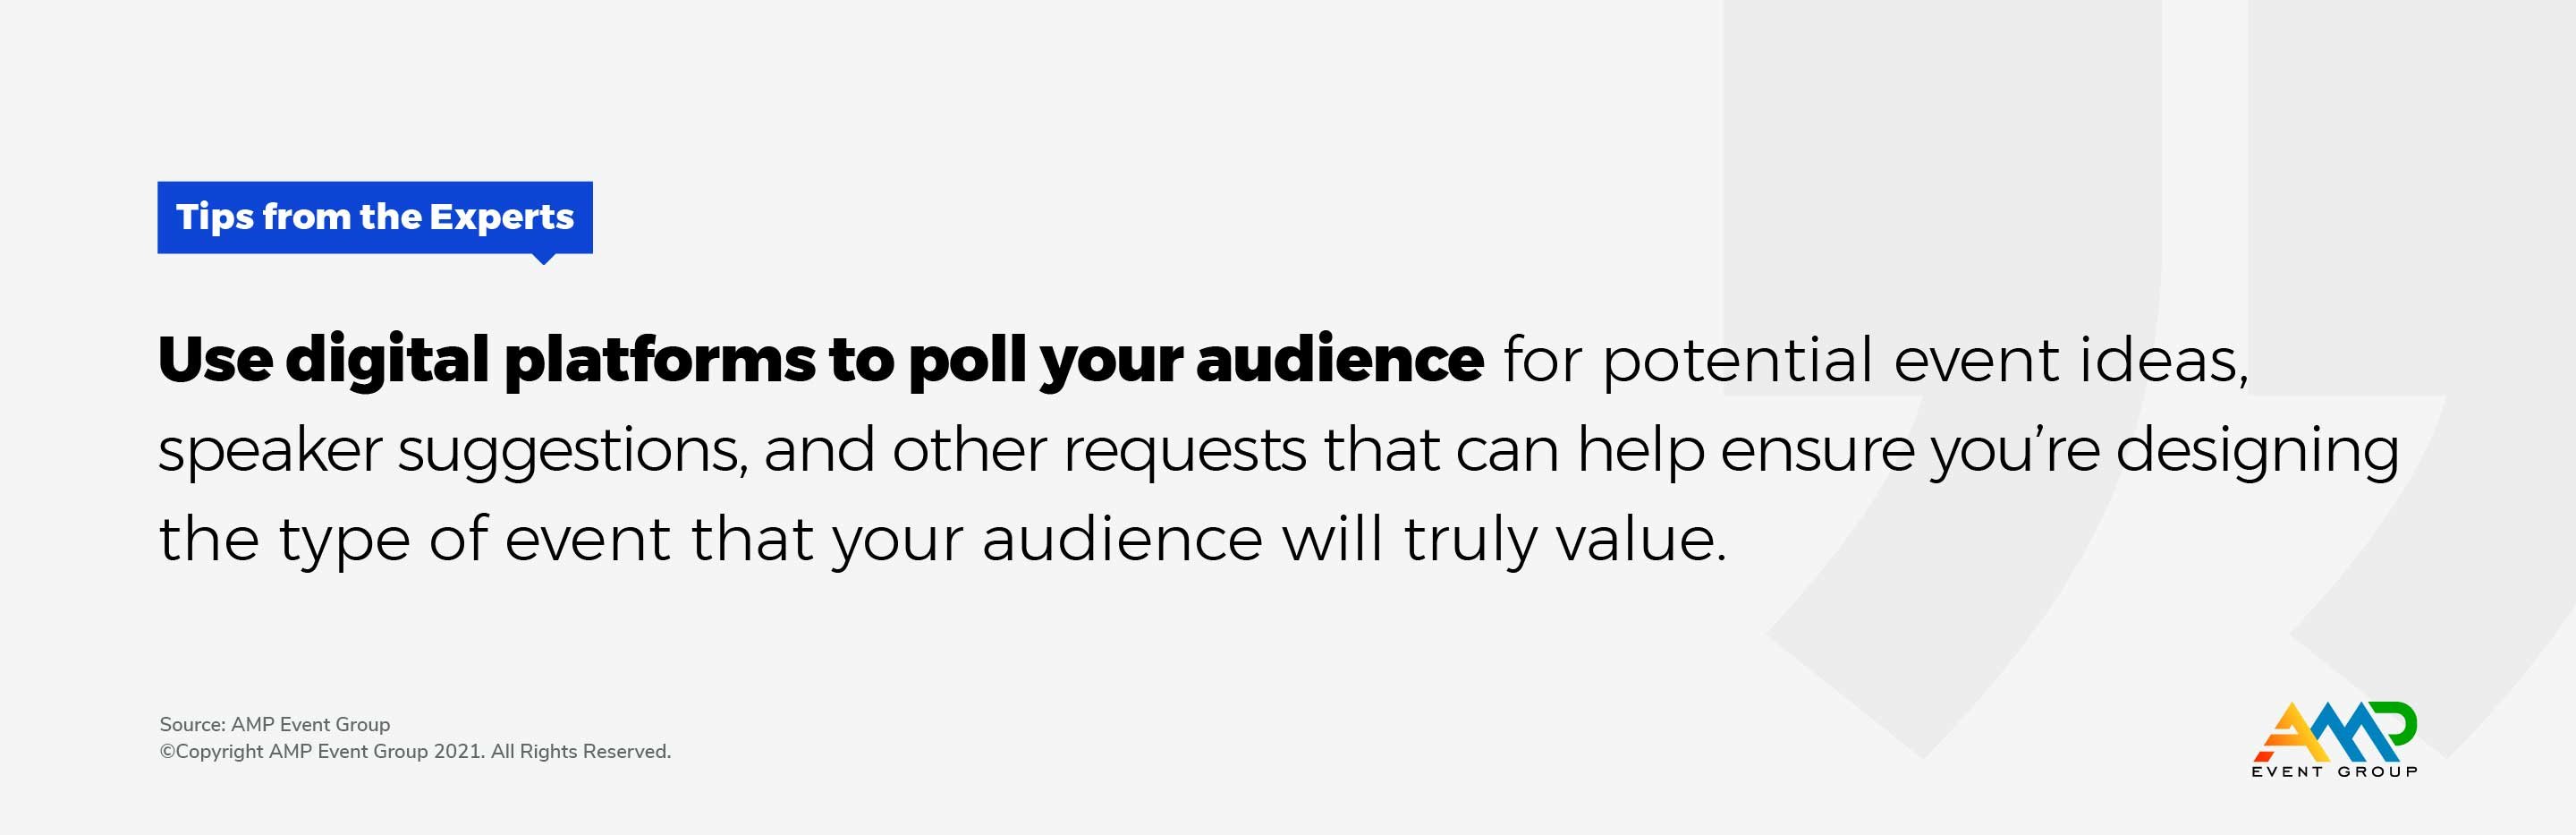 AMP Events: Hybrid Events Make Cents - Digital platforms to poll your audience 